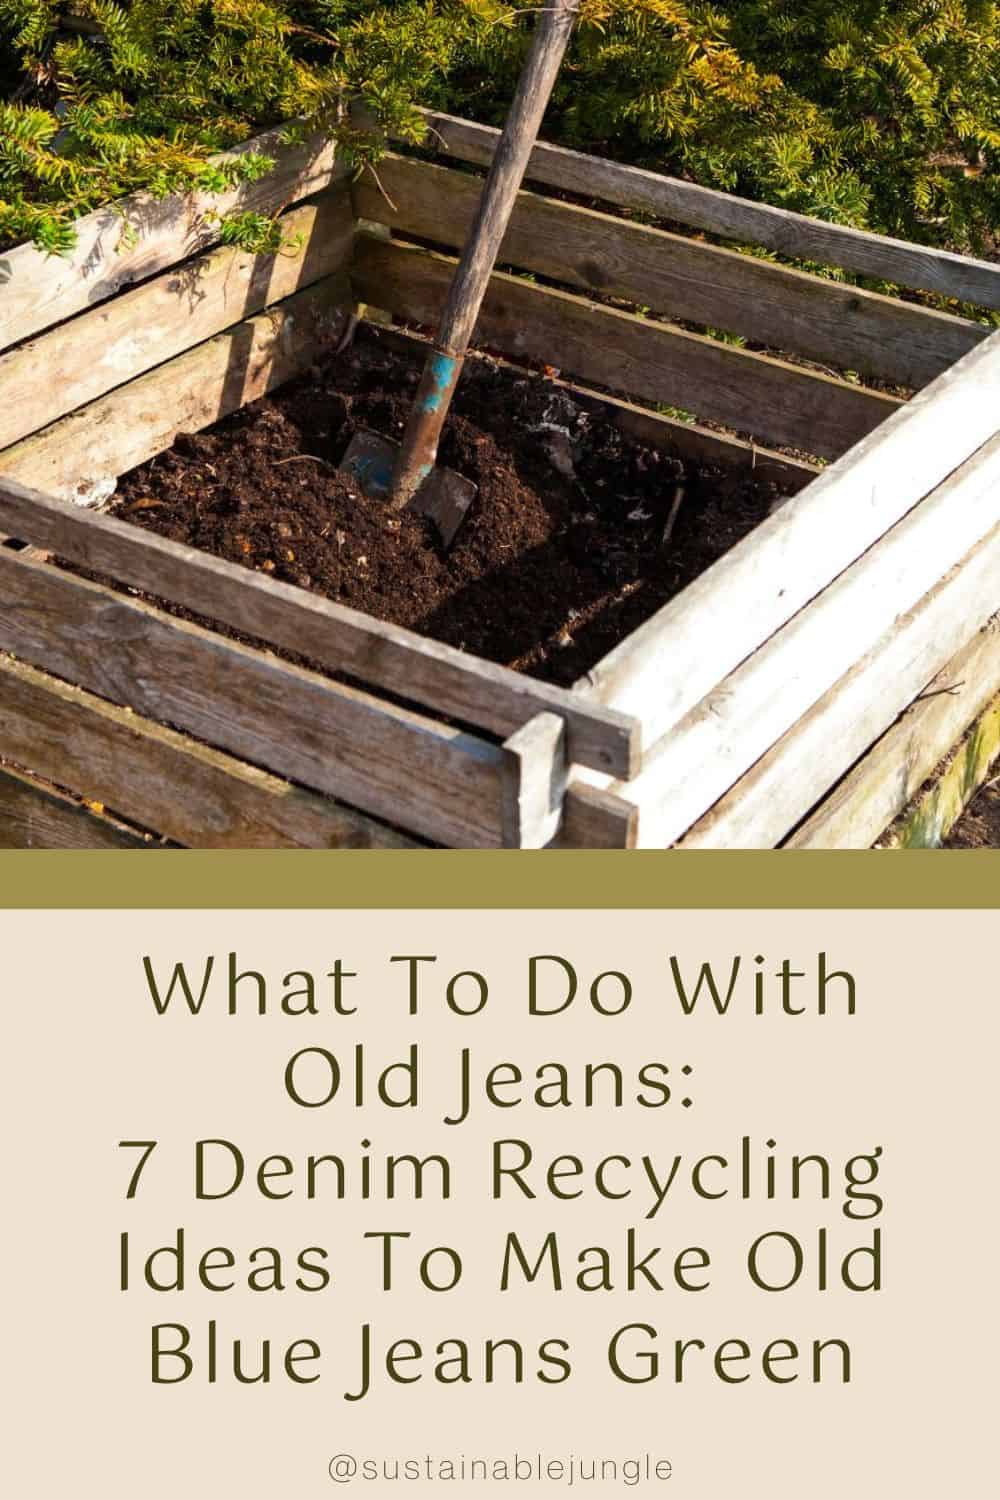 What To Do With Old Jeans: 7 Denim Recycling Ideas To Make Old Blue Jeans Green Image by fotomem via Getty Images on Canva Pro #whattodowitholdjeans #upcyclewhattodowitholdjeans #whattodowitholddenimjeans #denimrecycling #denimrecyclingprograms #denimrecyclingprojects #sustainablejungle